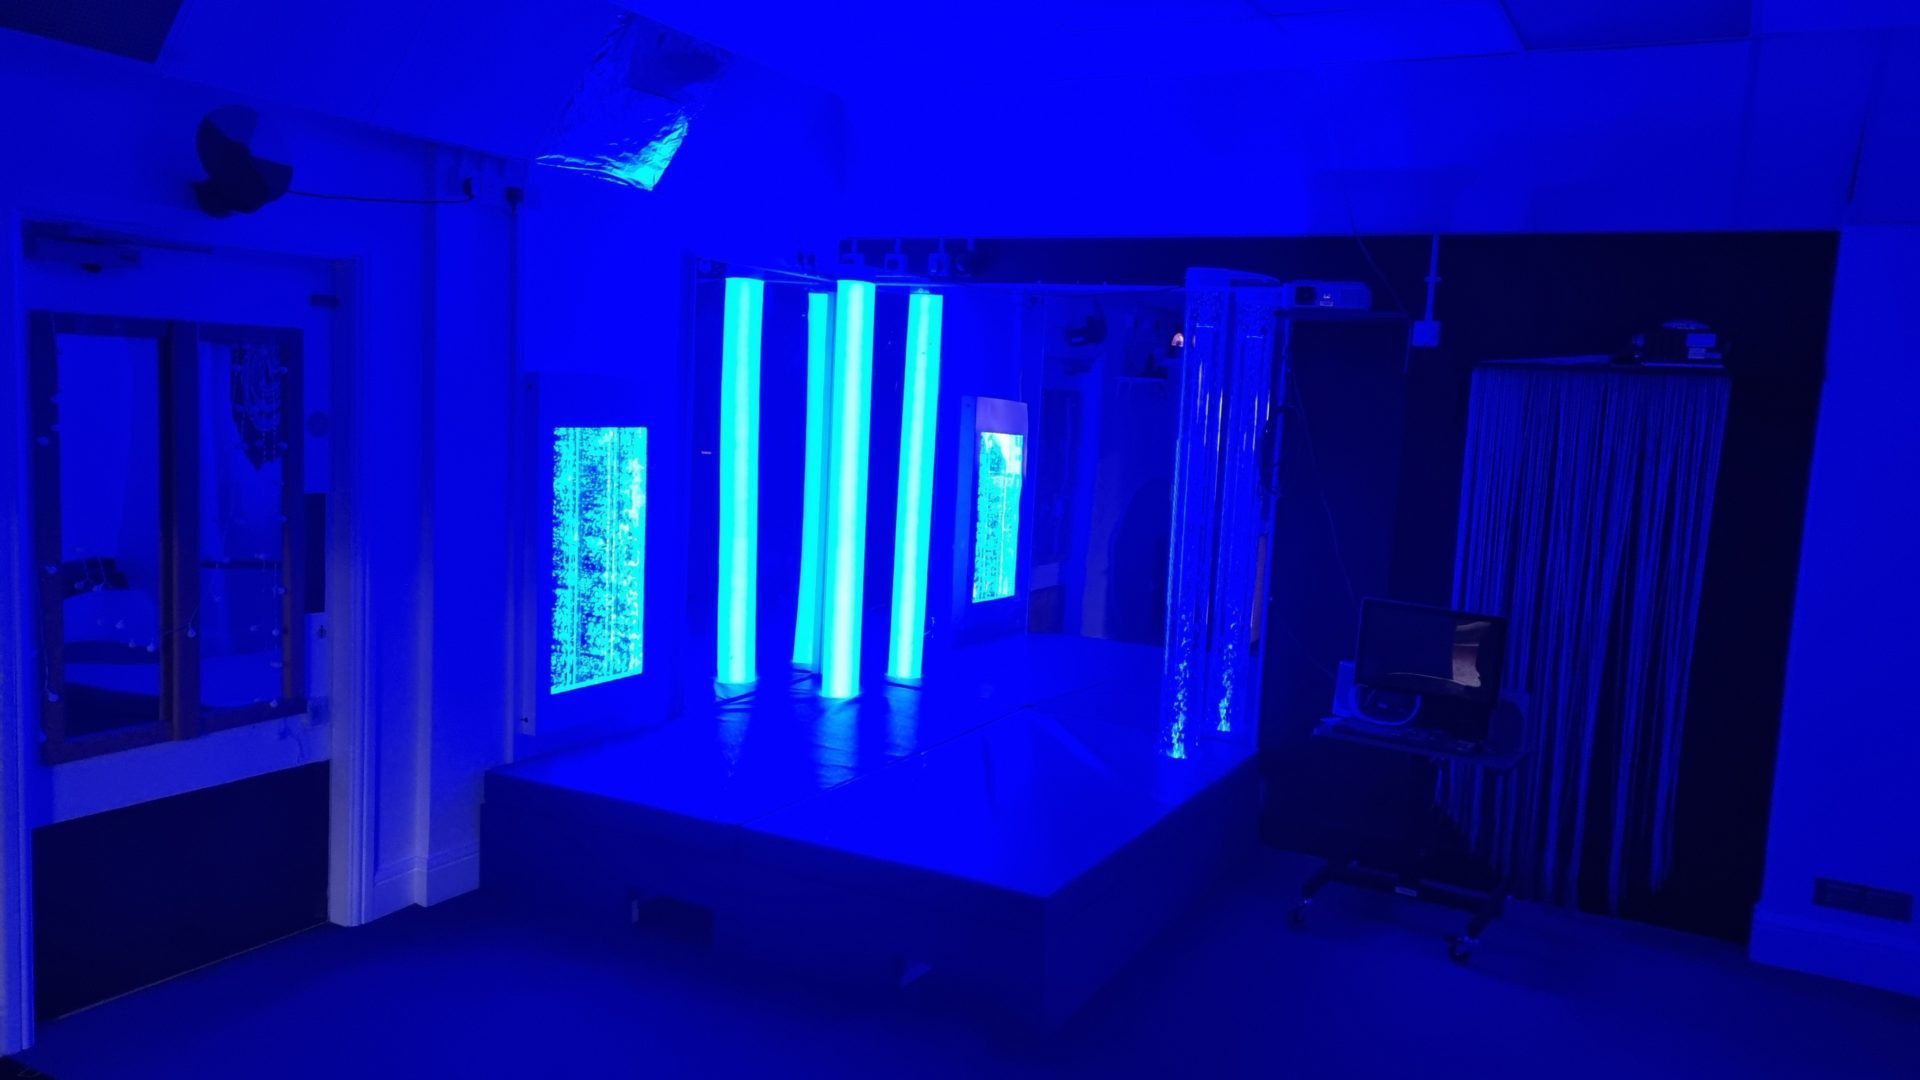 interactive light tube and bubble wall in a dark room to enhance sensory stimulation